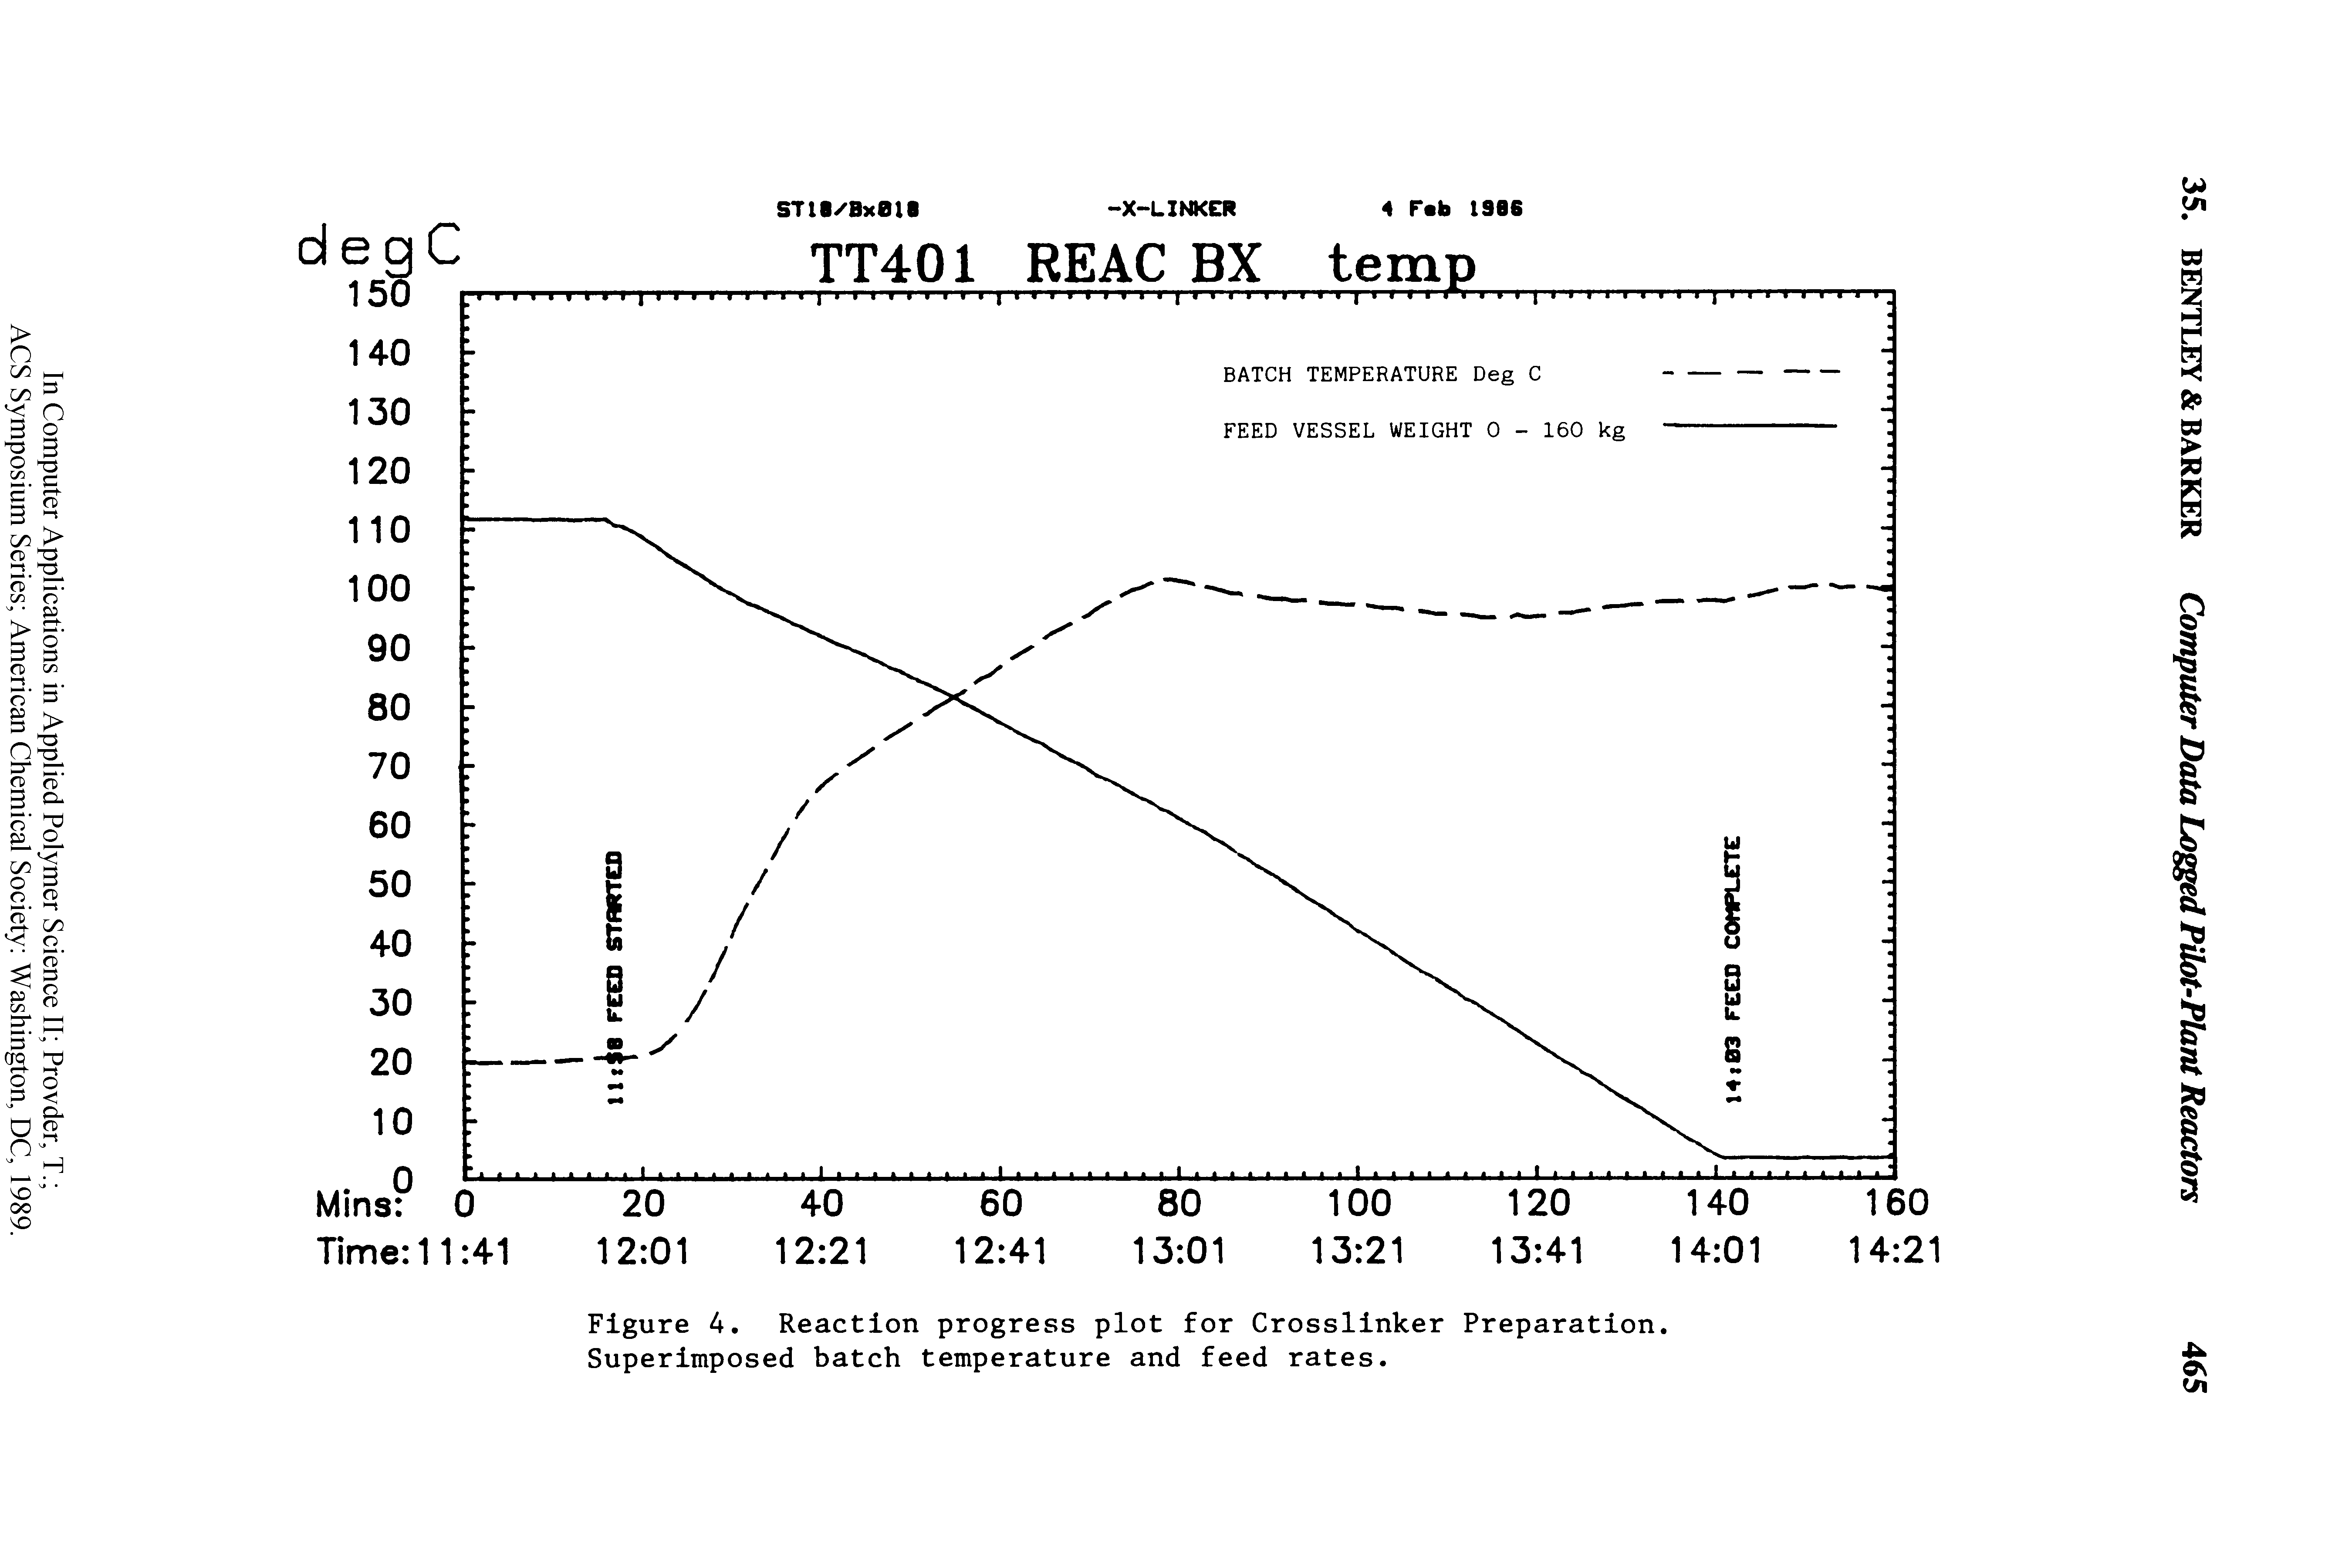 Figure 4. Reaction progress plot for Crosslinker Preparation. Superimposed batch temperature and feed rates.